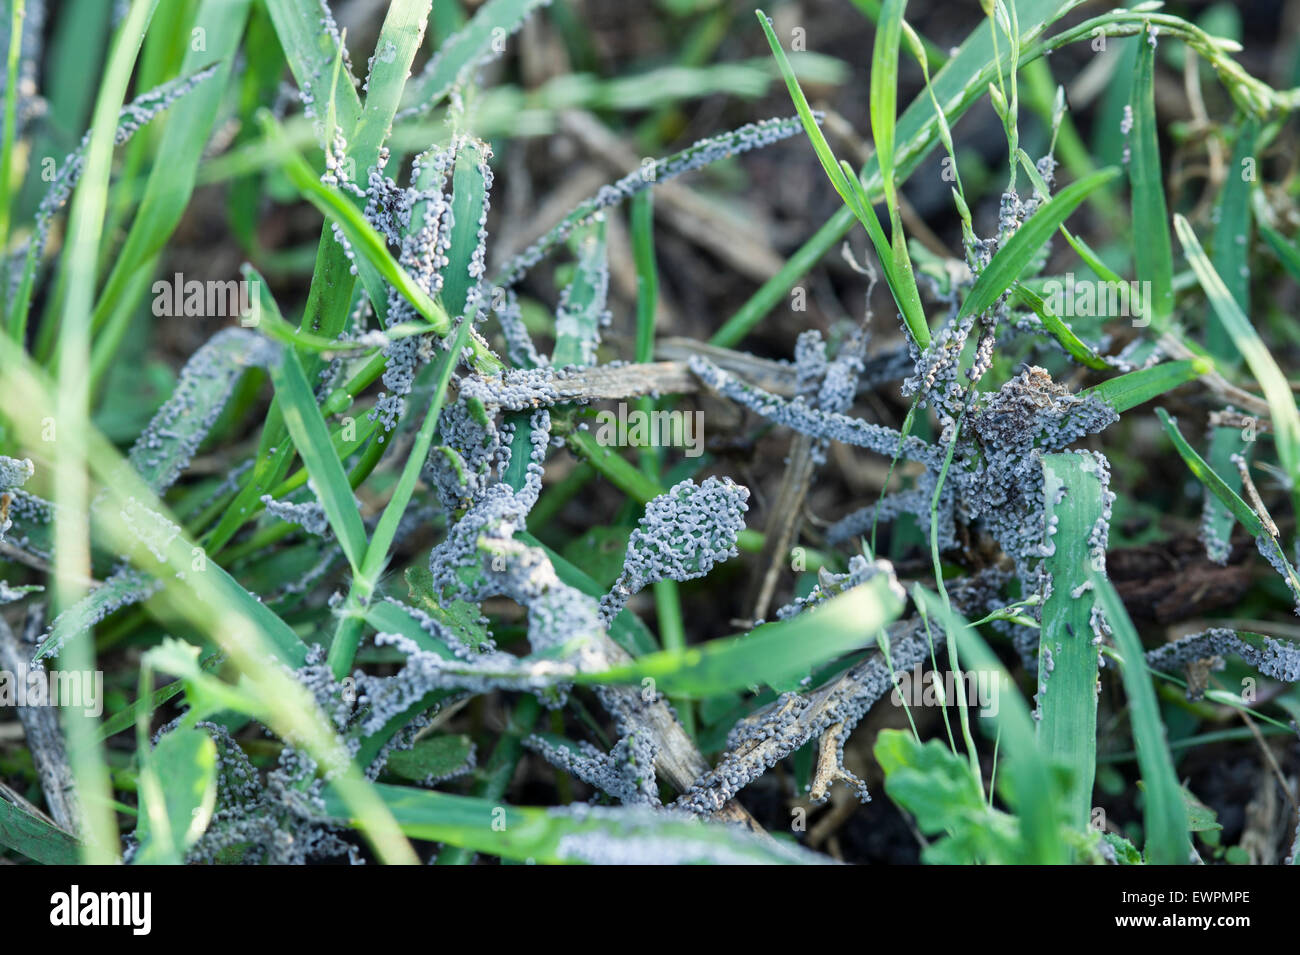 Grey slime mould (mold) on grass Stock Photo